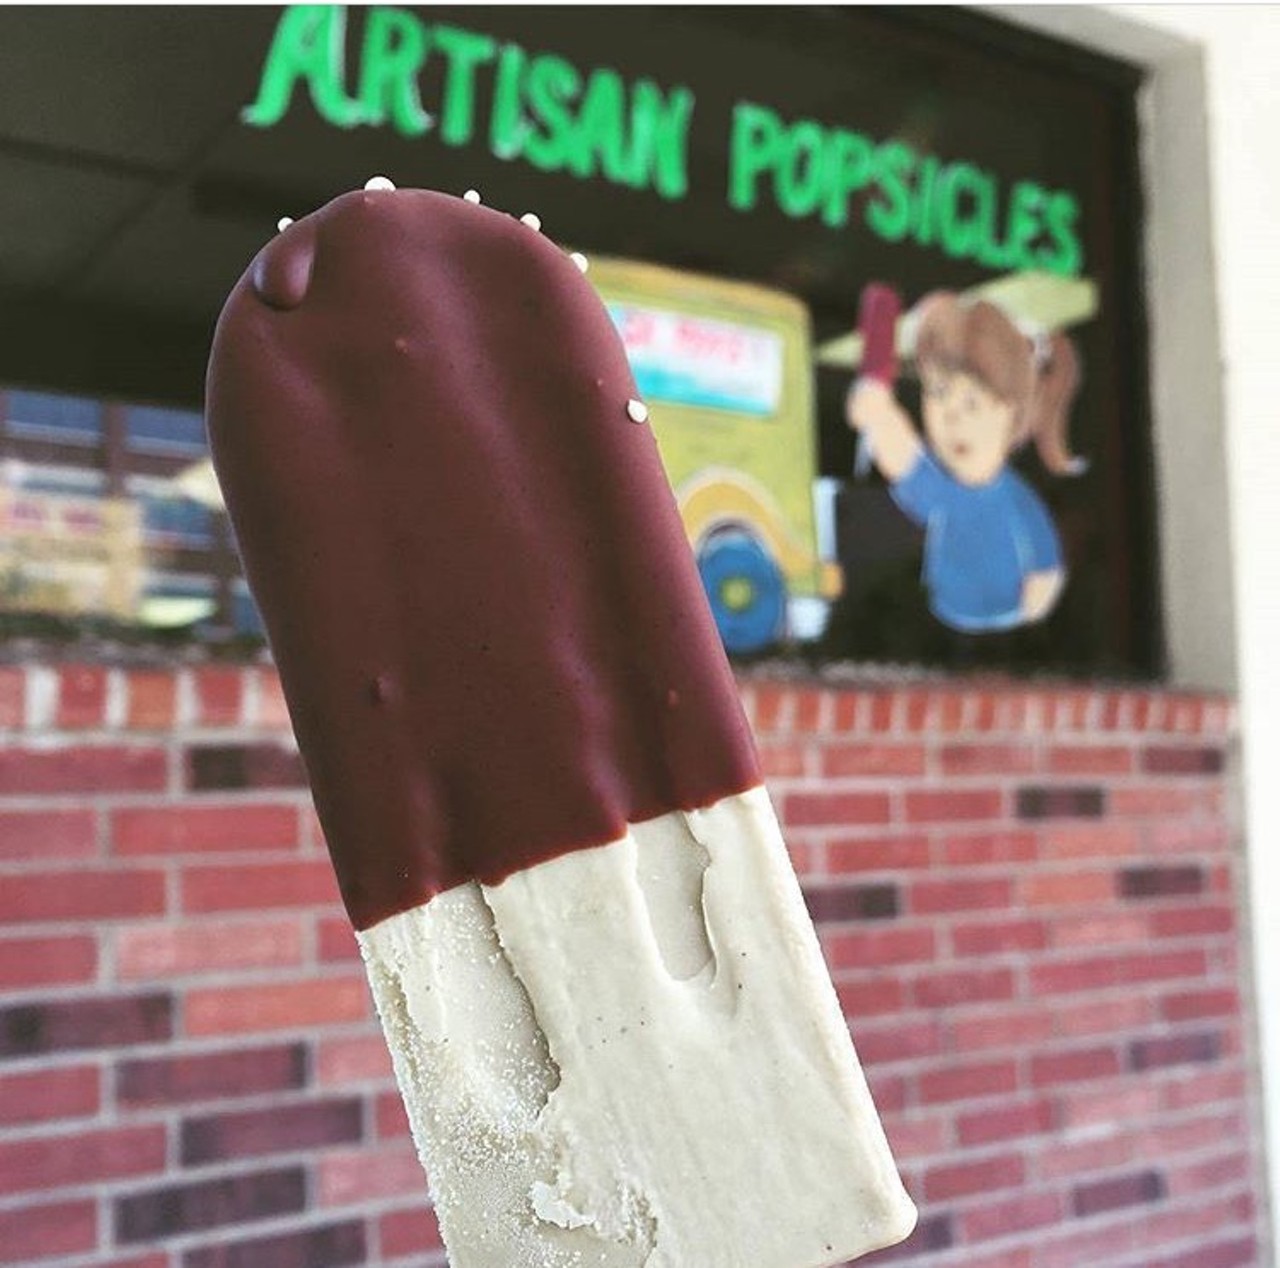 Go on a paleta date at SA Pops
3420 N. St Mary’s St., (210) 736-2526, facebook.com/sapops75
Nothing is as refreshing on a hot Texas day as a chocolate dipped paleta, especially for cheap.
Photo via bestfoodsanantonio